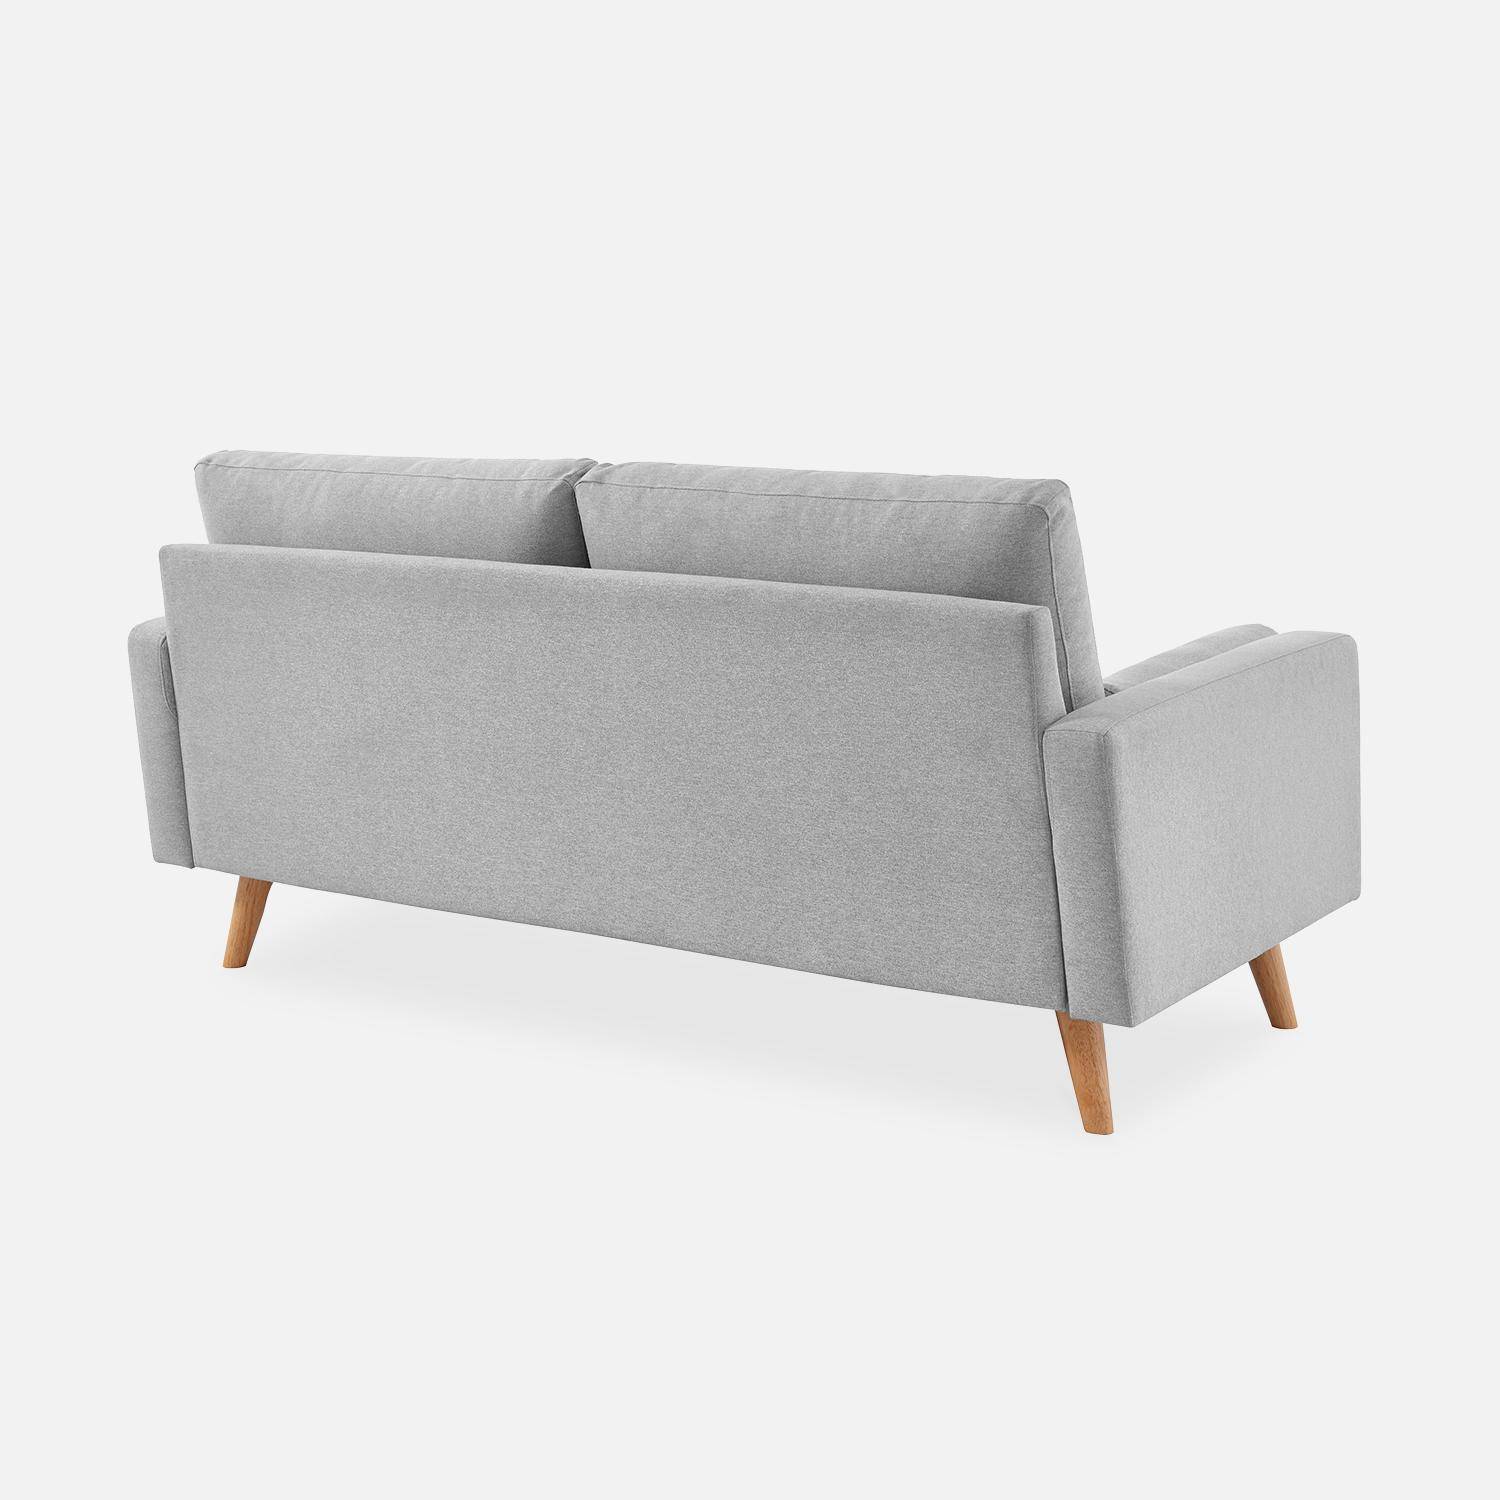 3-seater sofa with Scandi style wooden legs - Ivar - Grey Photo5